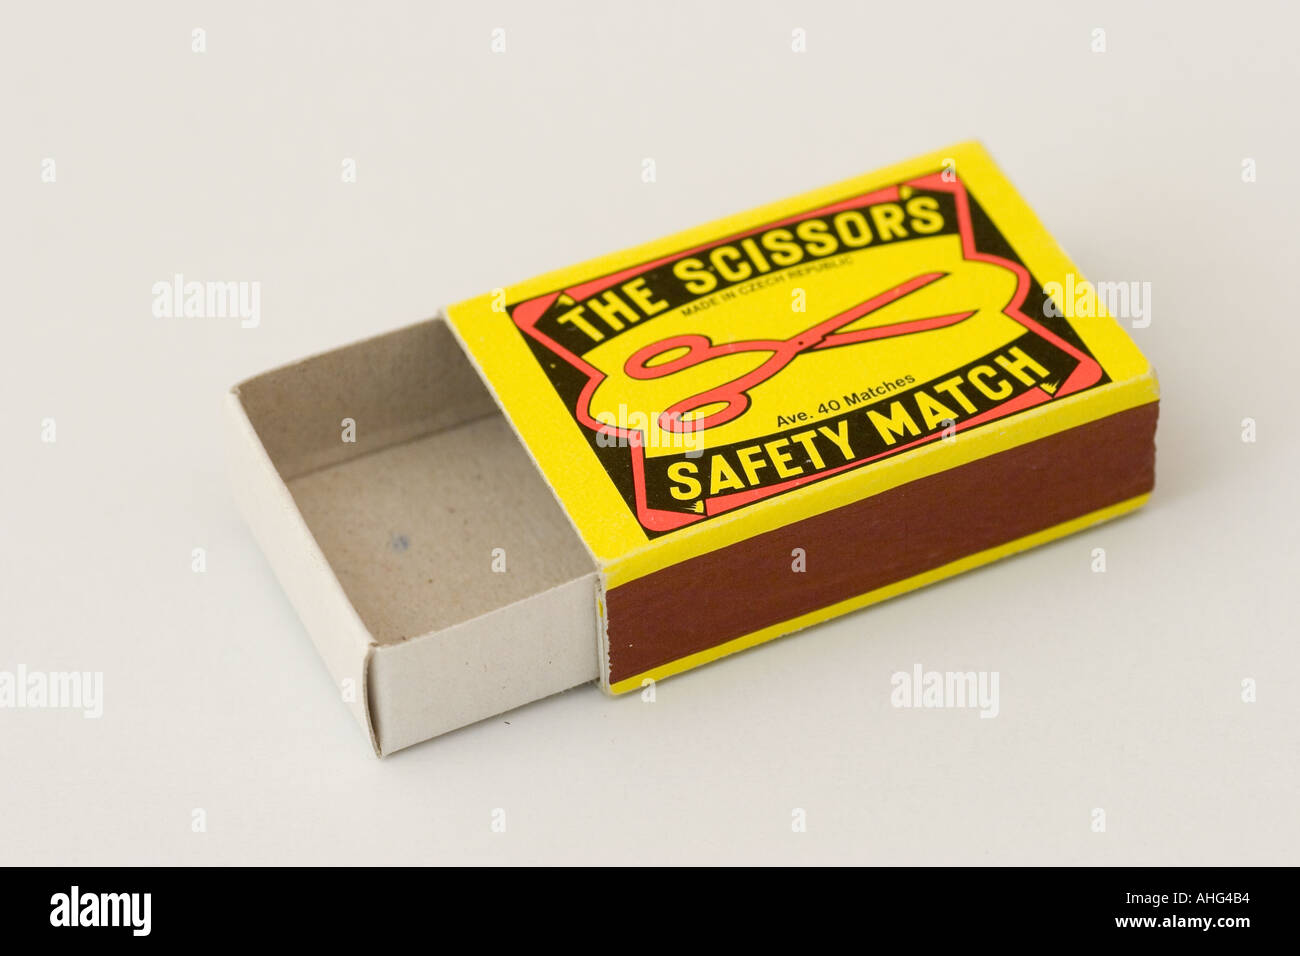 Download Empty Box Of Safety Matches Stock Photo Alamy